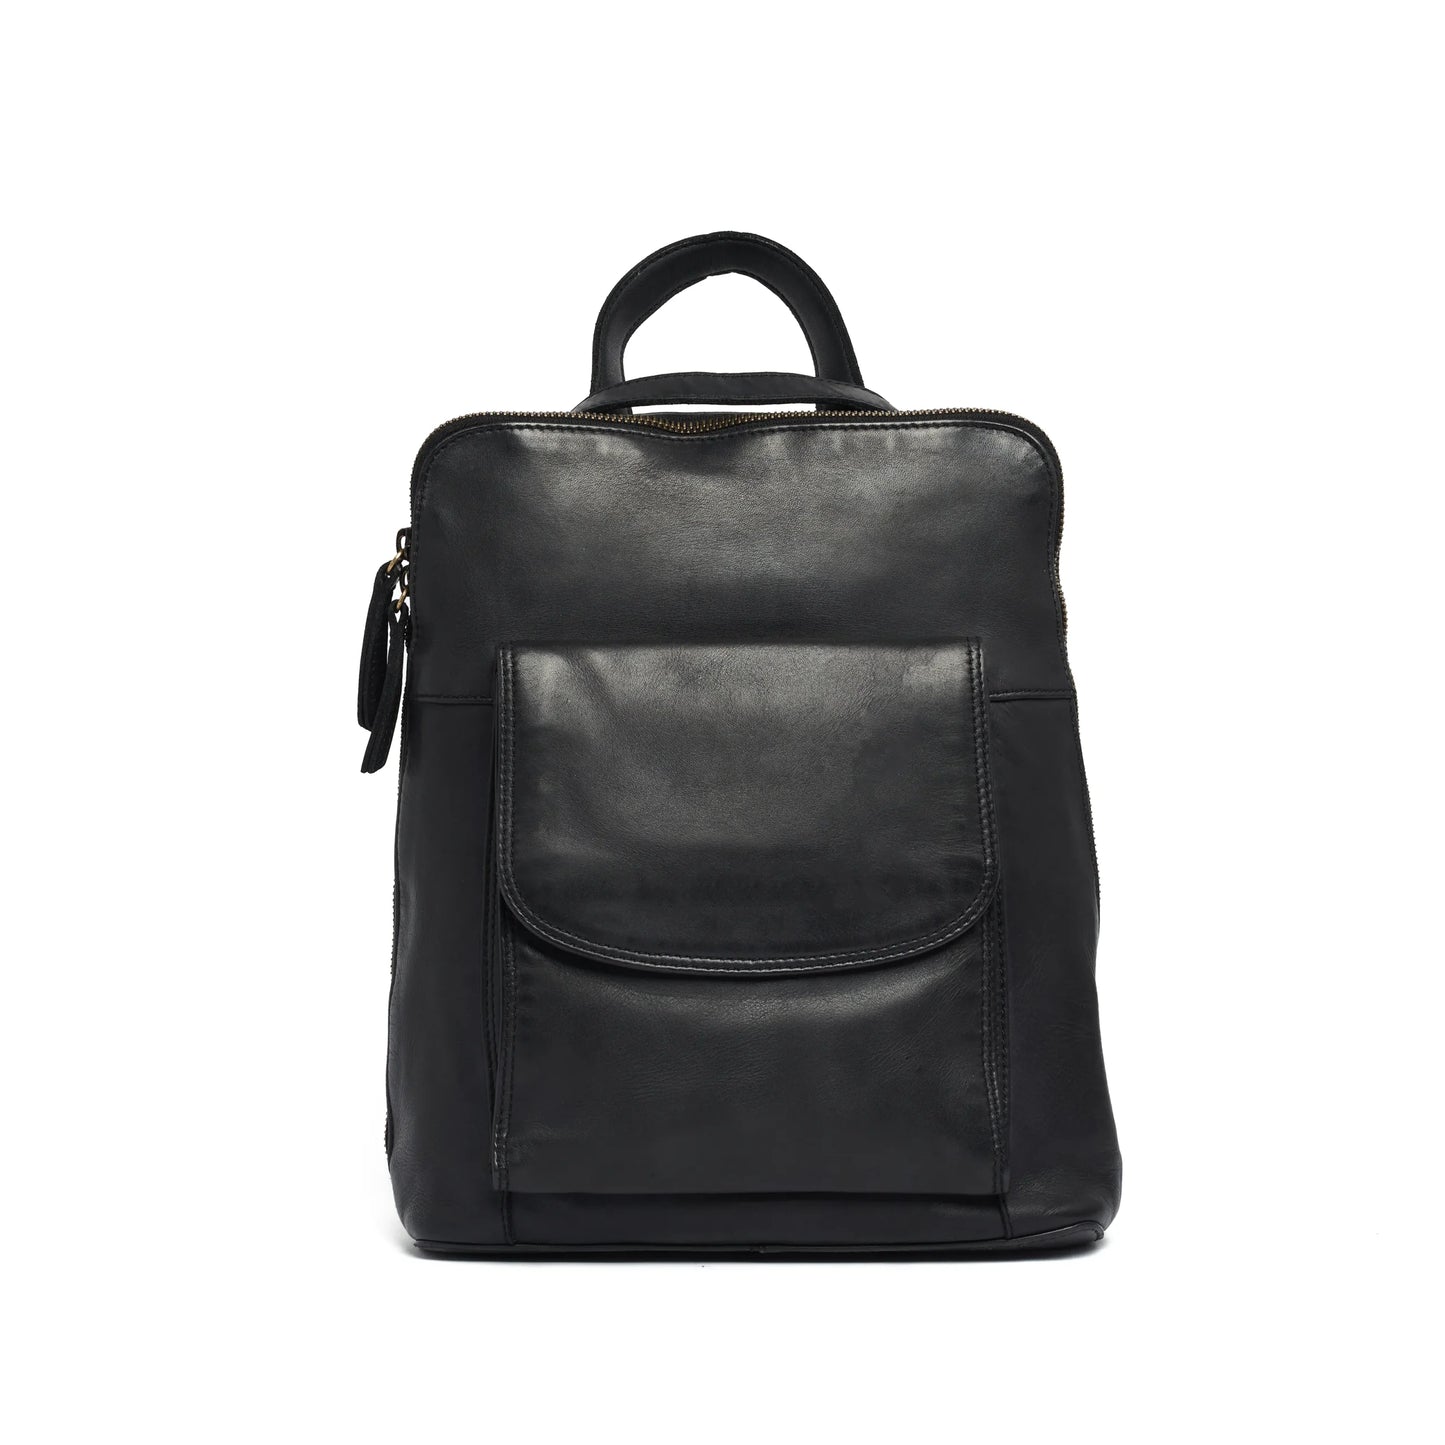 Rugged Hide RH-4622 Vanessa leather backpack